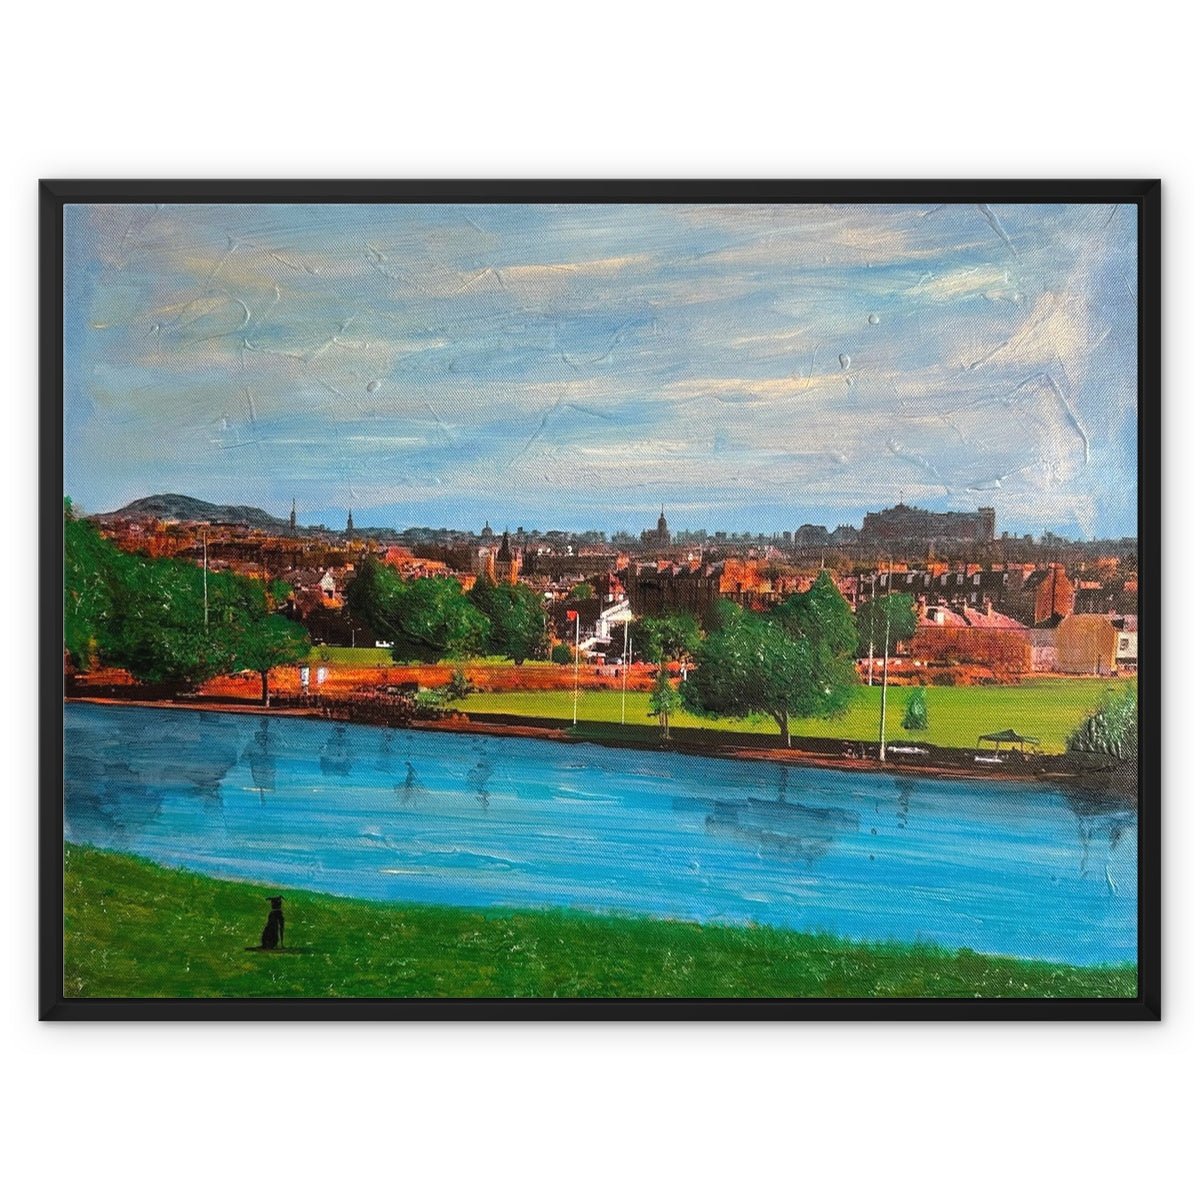 Edinburgh Painting | Framed Canvas From Scotland-Floating Framed Canvas Prints-Edinburgh & Glasgow Art Gallery-32"x24"-Black Frame-Paintings, Prints, Homeware, Art Gifts From Scotland By Scottish Artist Kevin Hunter